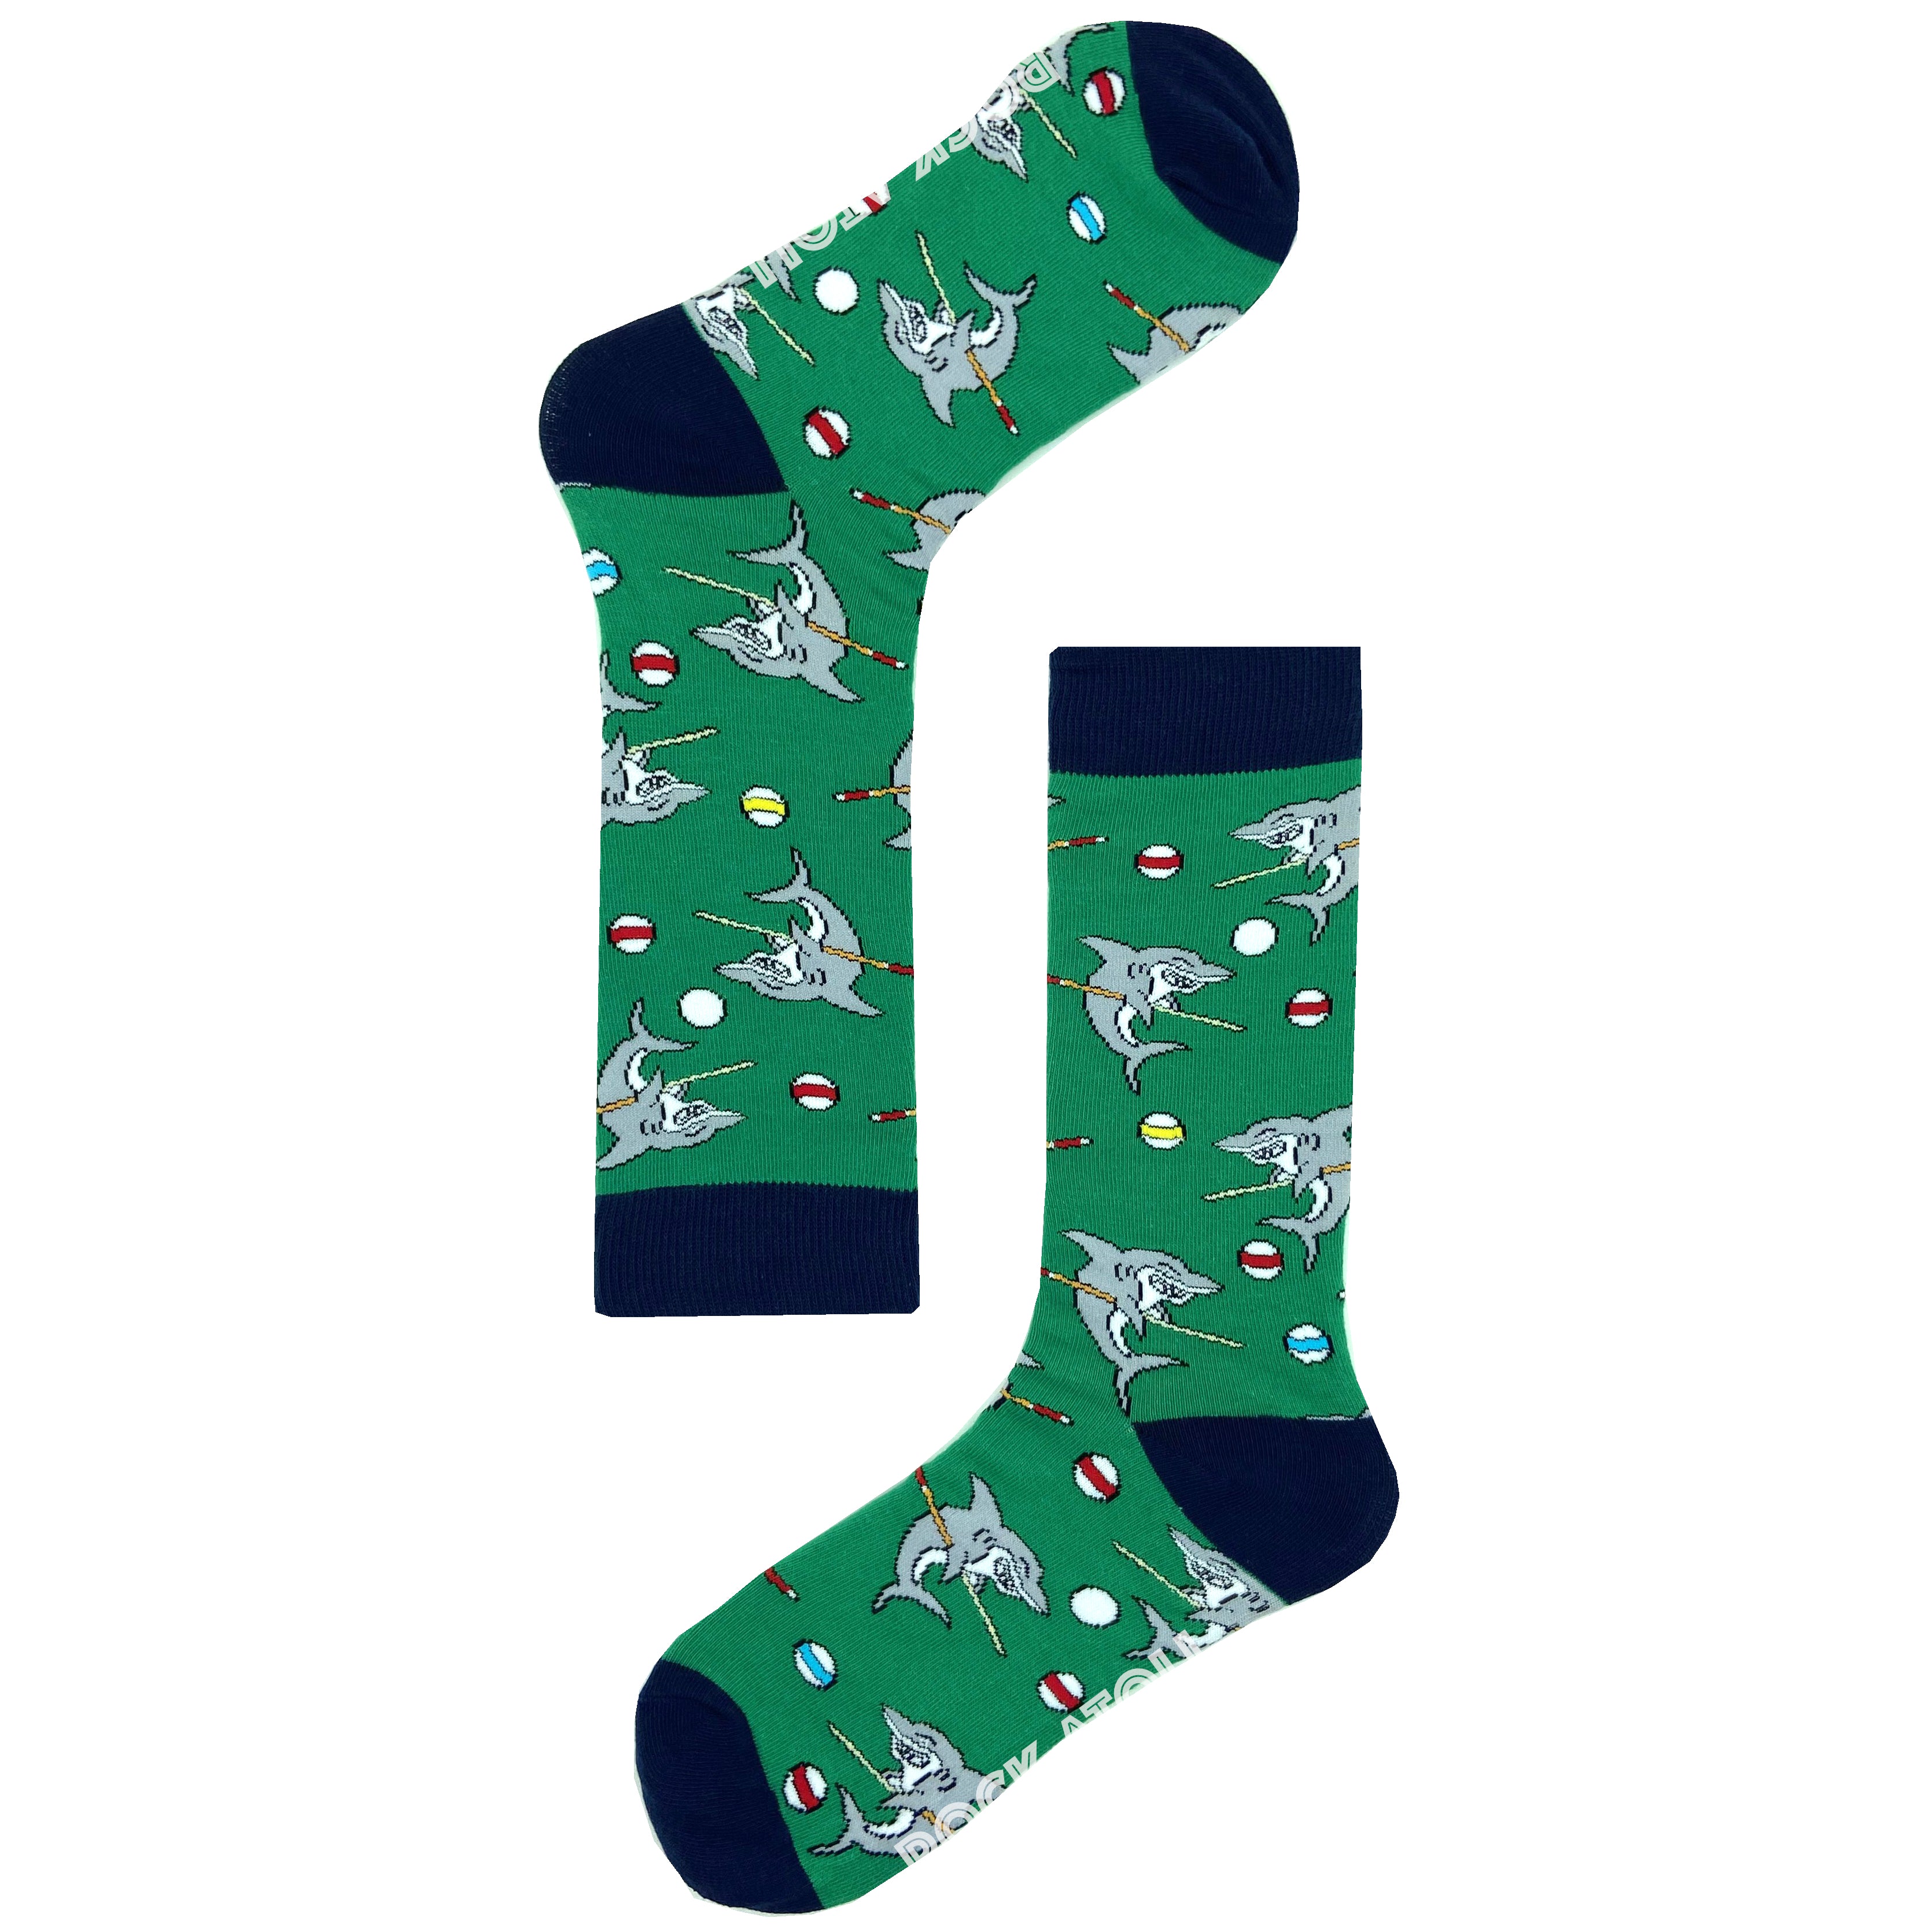 Sharks Playing Pool Billiards Snooker Patterned Novelty Socks in Green